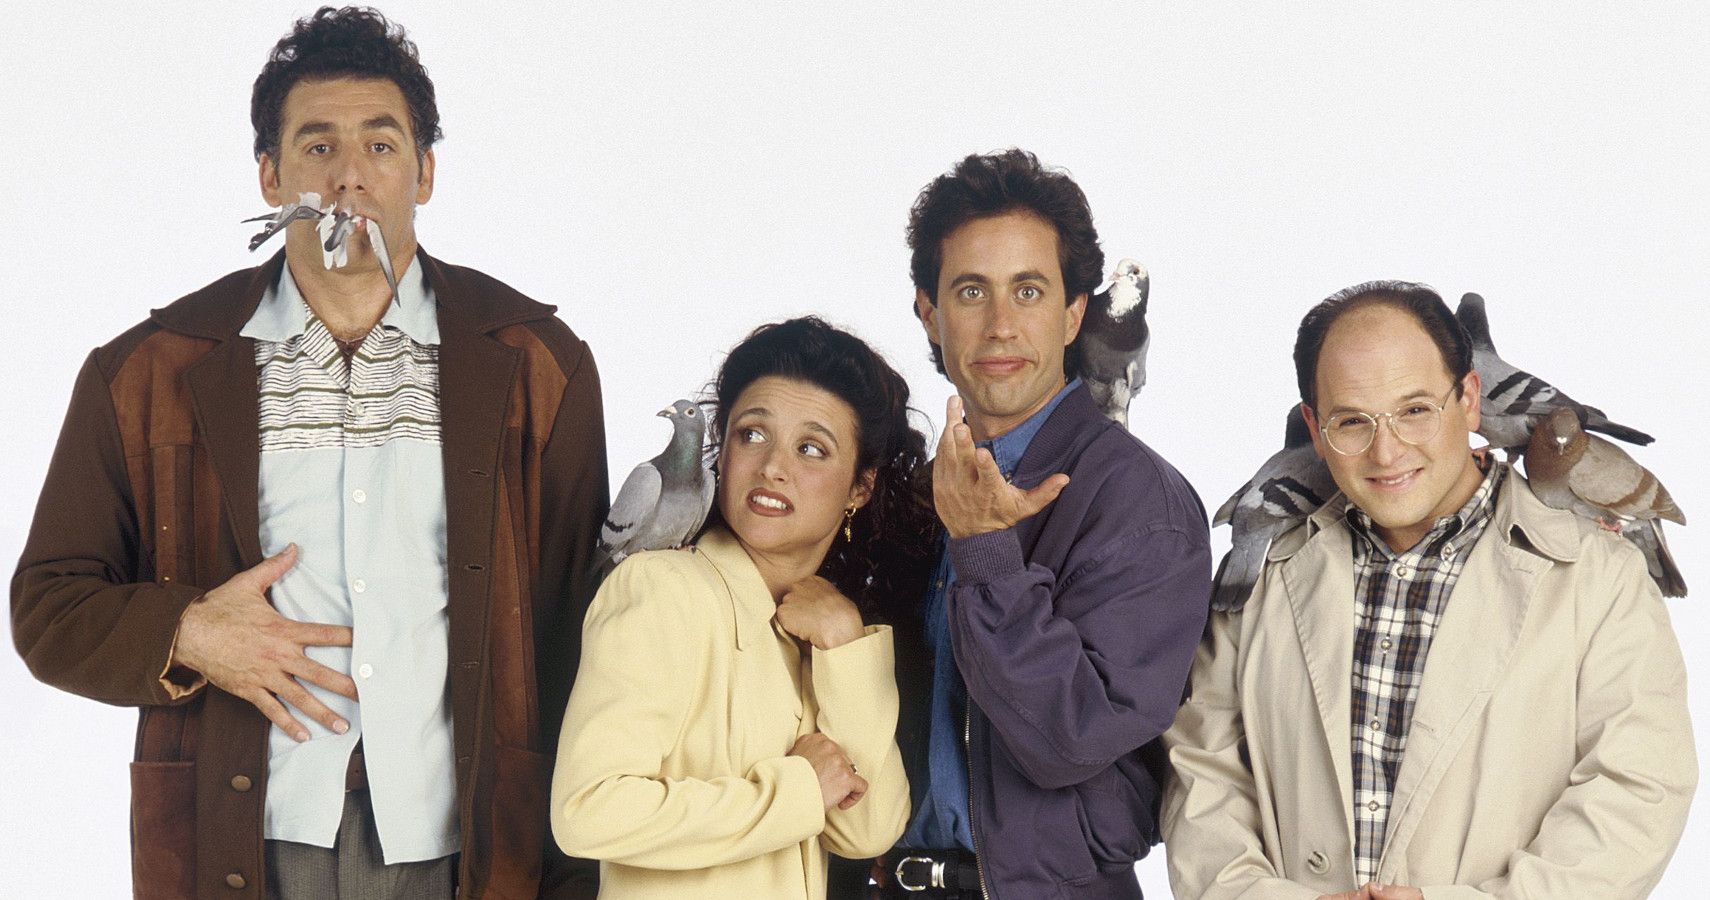 10 Things That Happened In Season 1 Of Seinfeld Fans Completely Forgot About